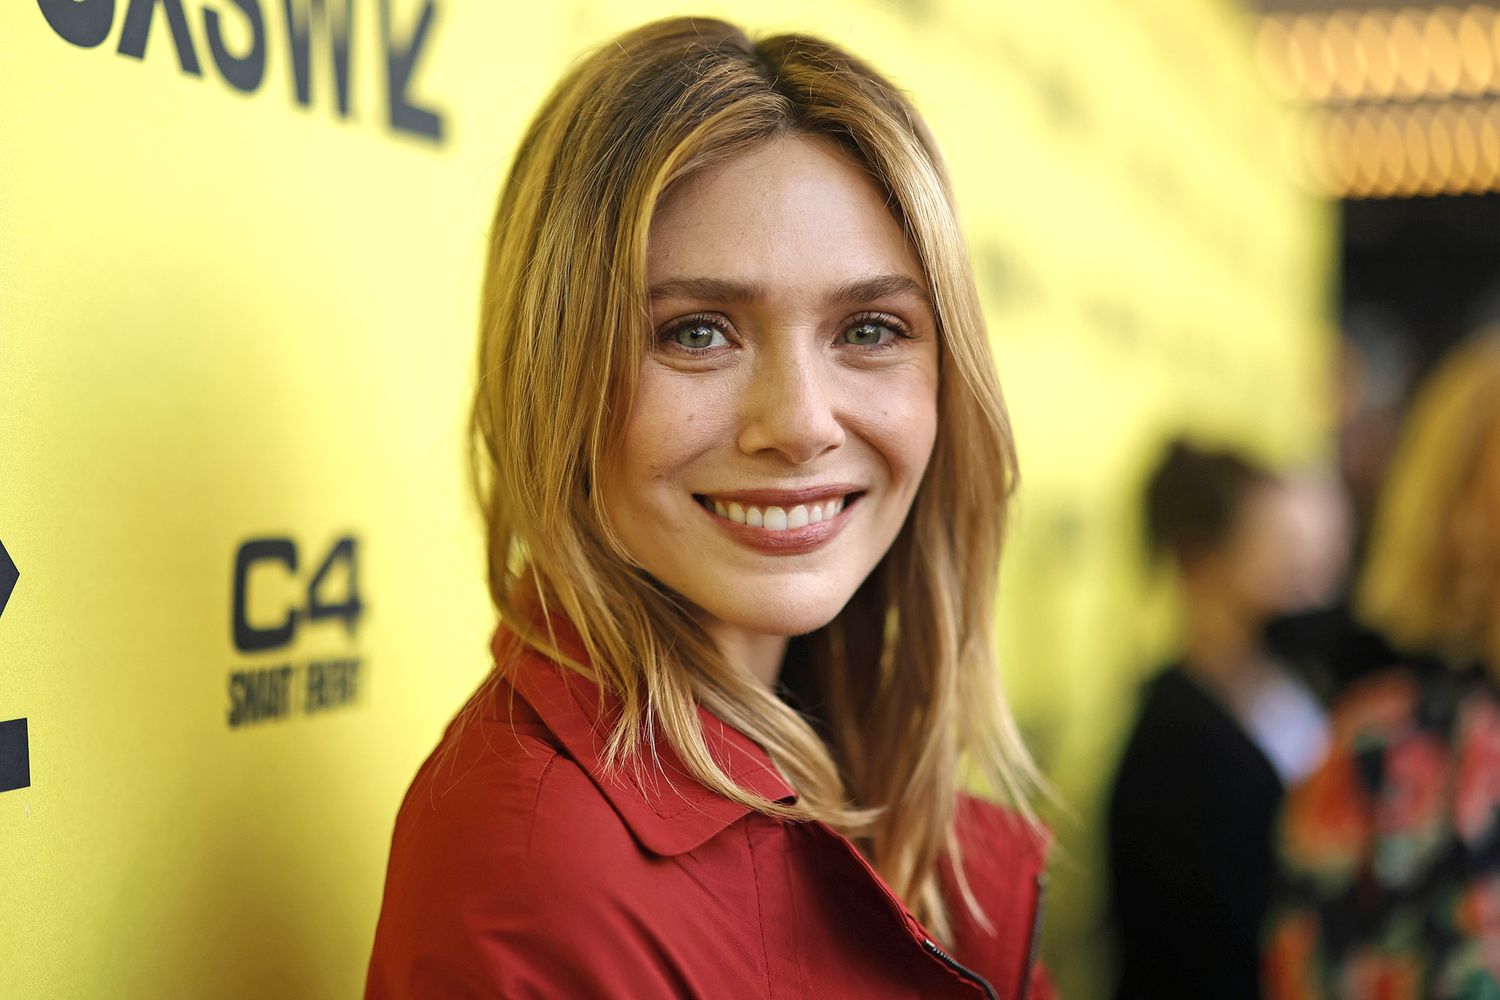 AUSTIN, TEXAS - MARCH 11: Elizabeth Olsen attends the "Love & Death" premiere at the 2023 SXSW Conference and Festivals at The Paramount Theater on March 11, 2023 in Austin, Texas. (Photo by Frazer Harrison/Getty Images for SXSW)